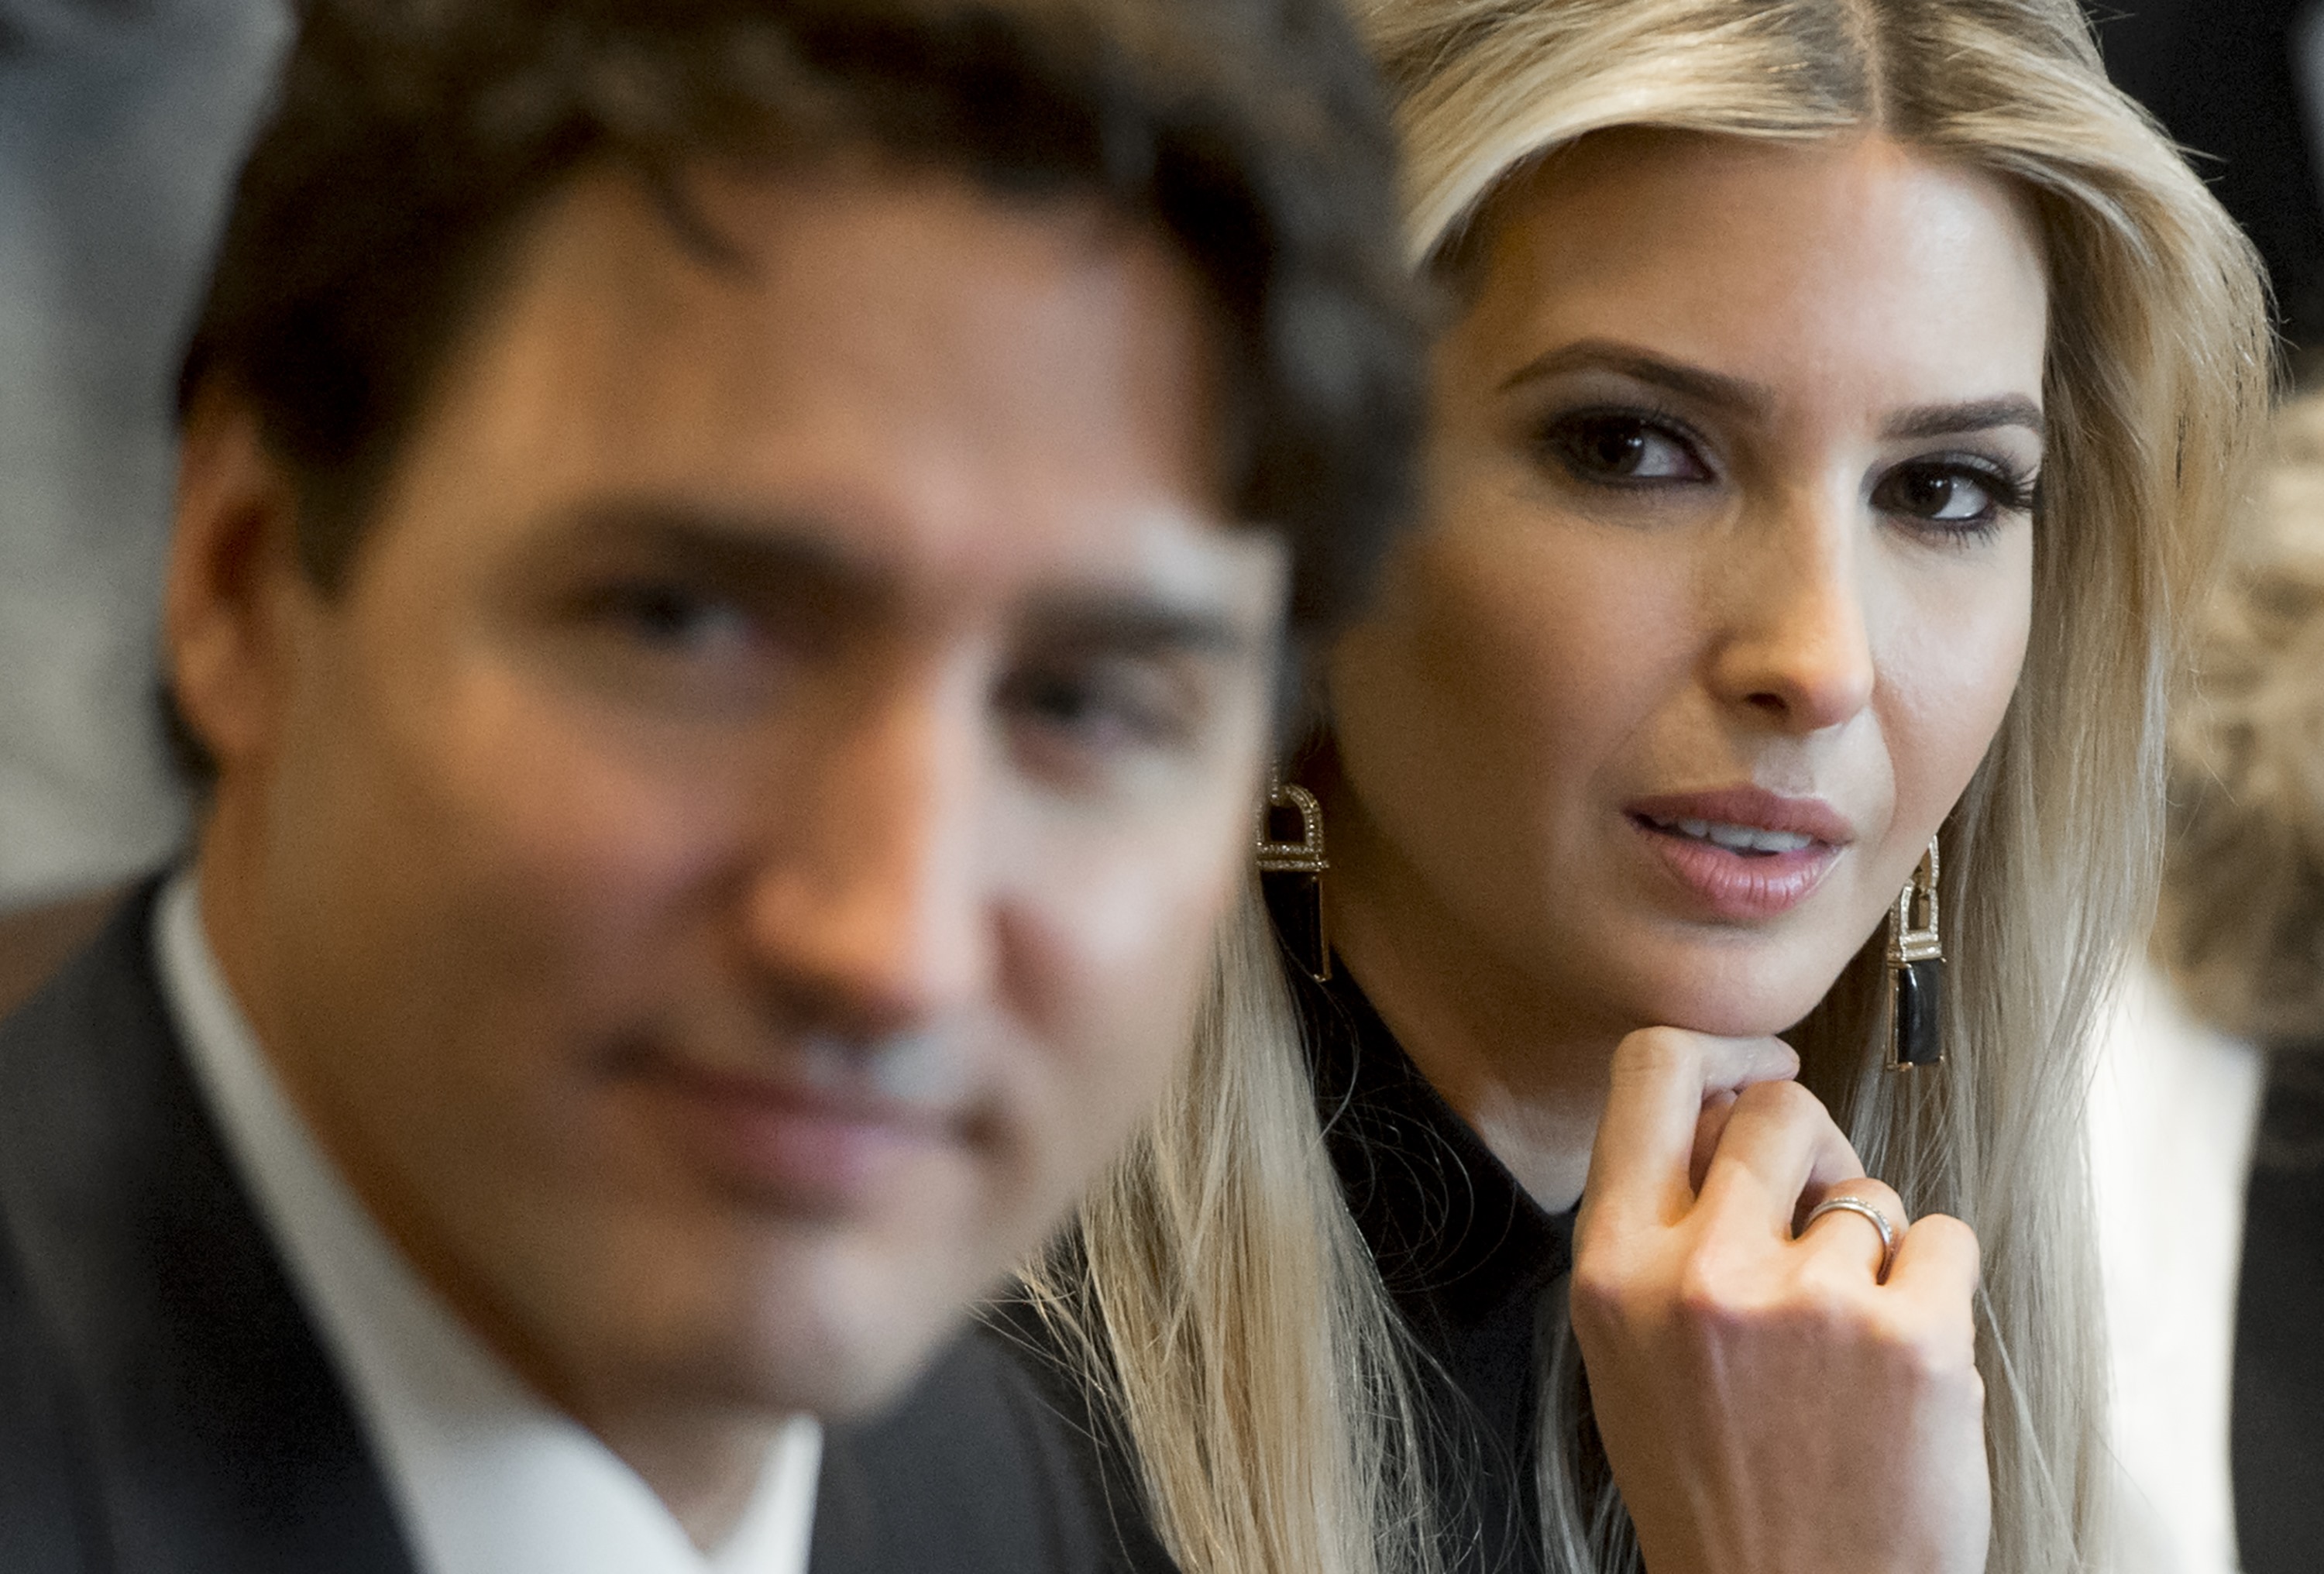 Canadian Prime Minister Justin Trudeau sits alongside Ivanka Trump (R), daughter of US President Donald Trump, during a roundtable discussion on women entrepreneurs and business leaders in the Cabinet Room of the White House in Washington, DC, February 13, 2017. SAUL LOEB/AFP/Getty Images